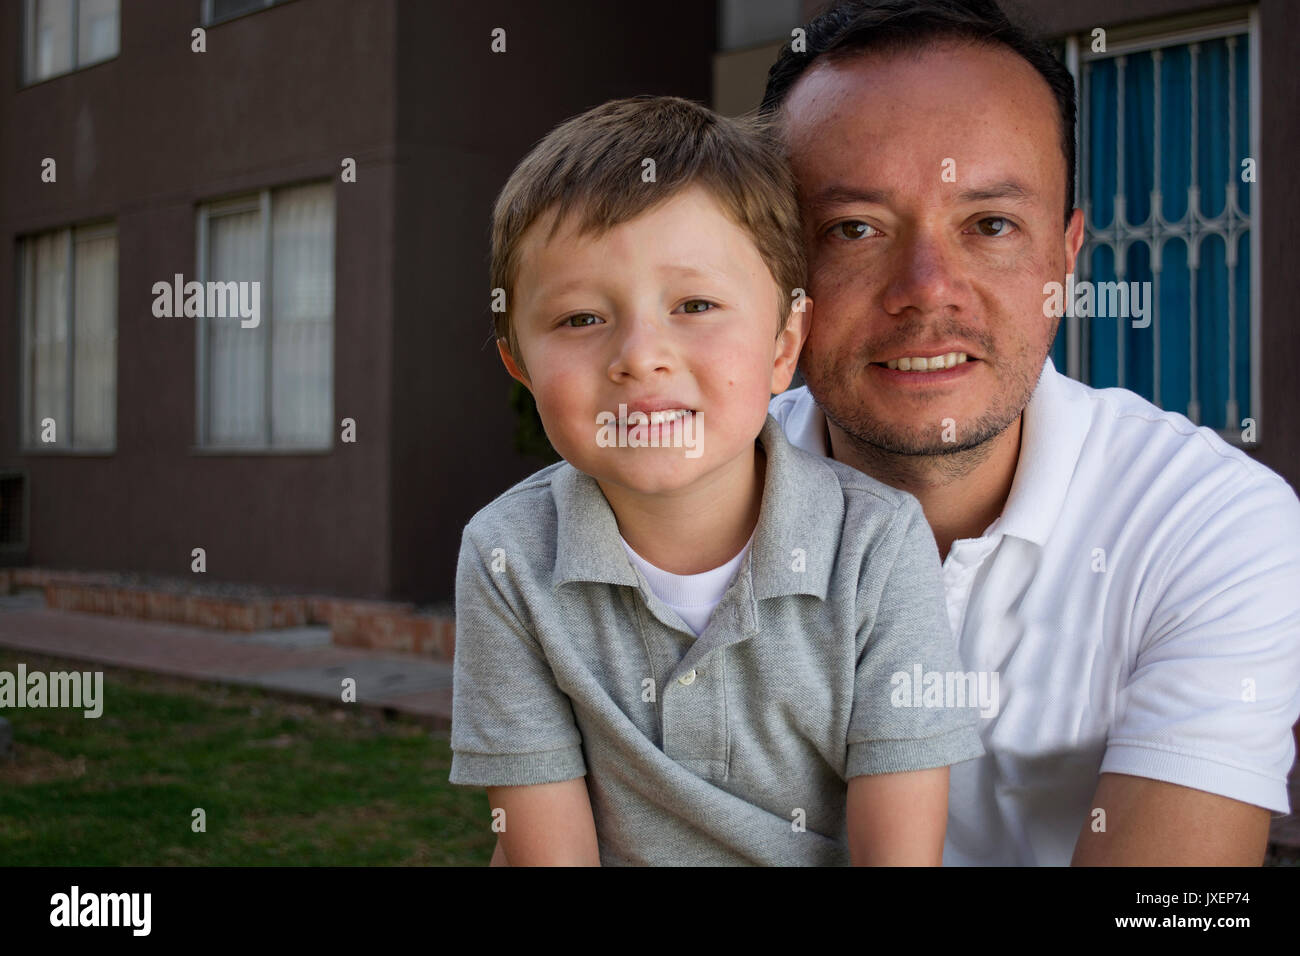 Happy Latin American man and boy, father and son. Stock Photo